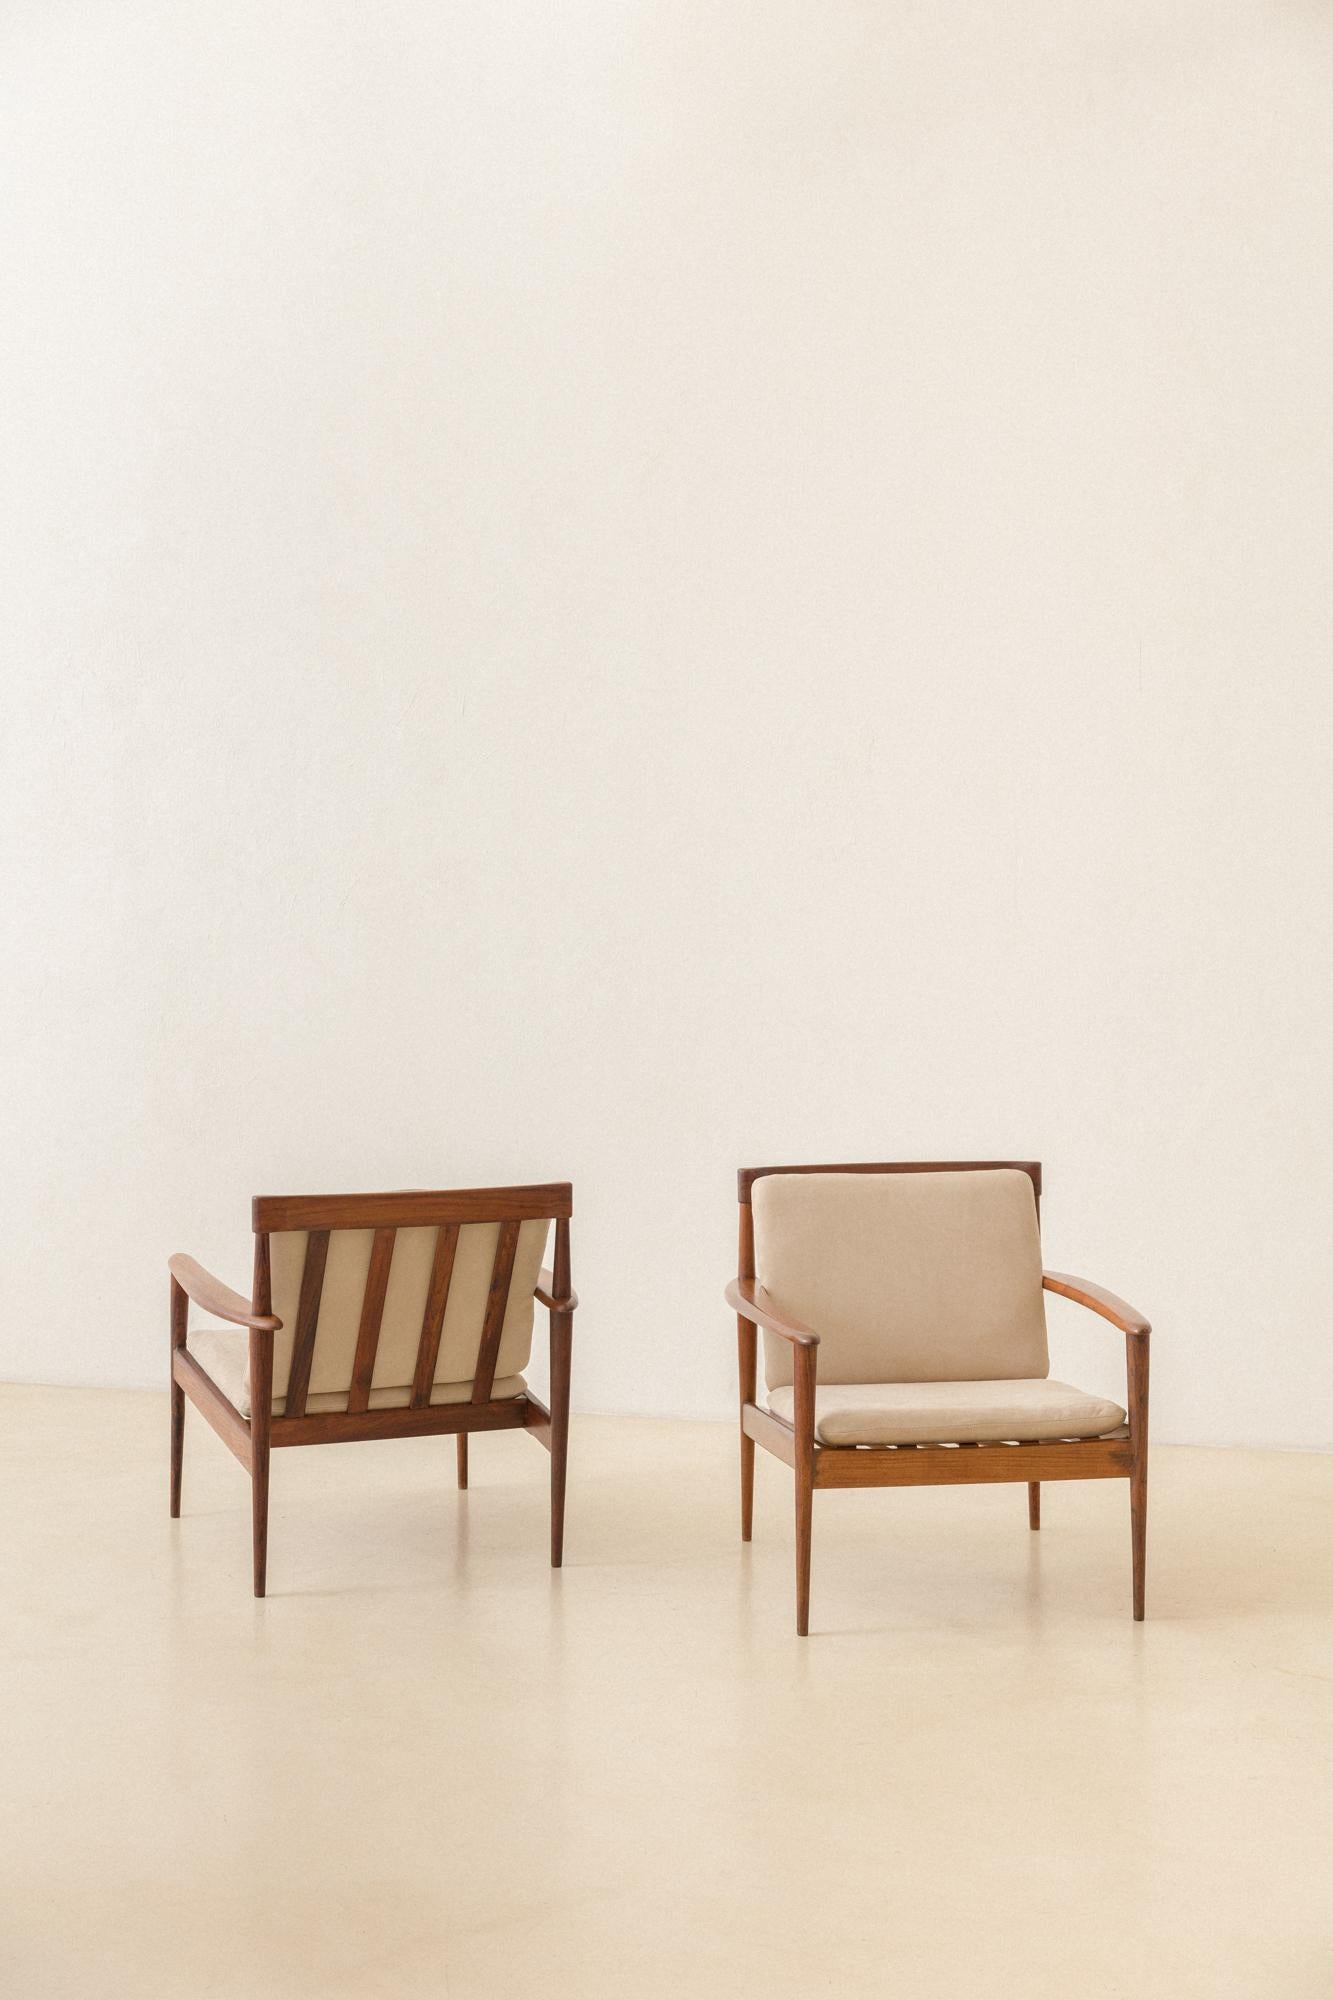 Mid-20th Century Pair of Armchairs by Grete Jalk/Rino Levi, c. 1951, Brazilian Midcentury Design For Sale